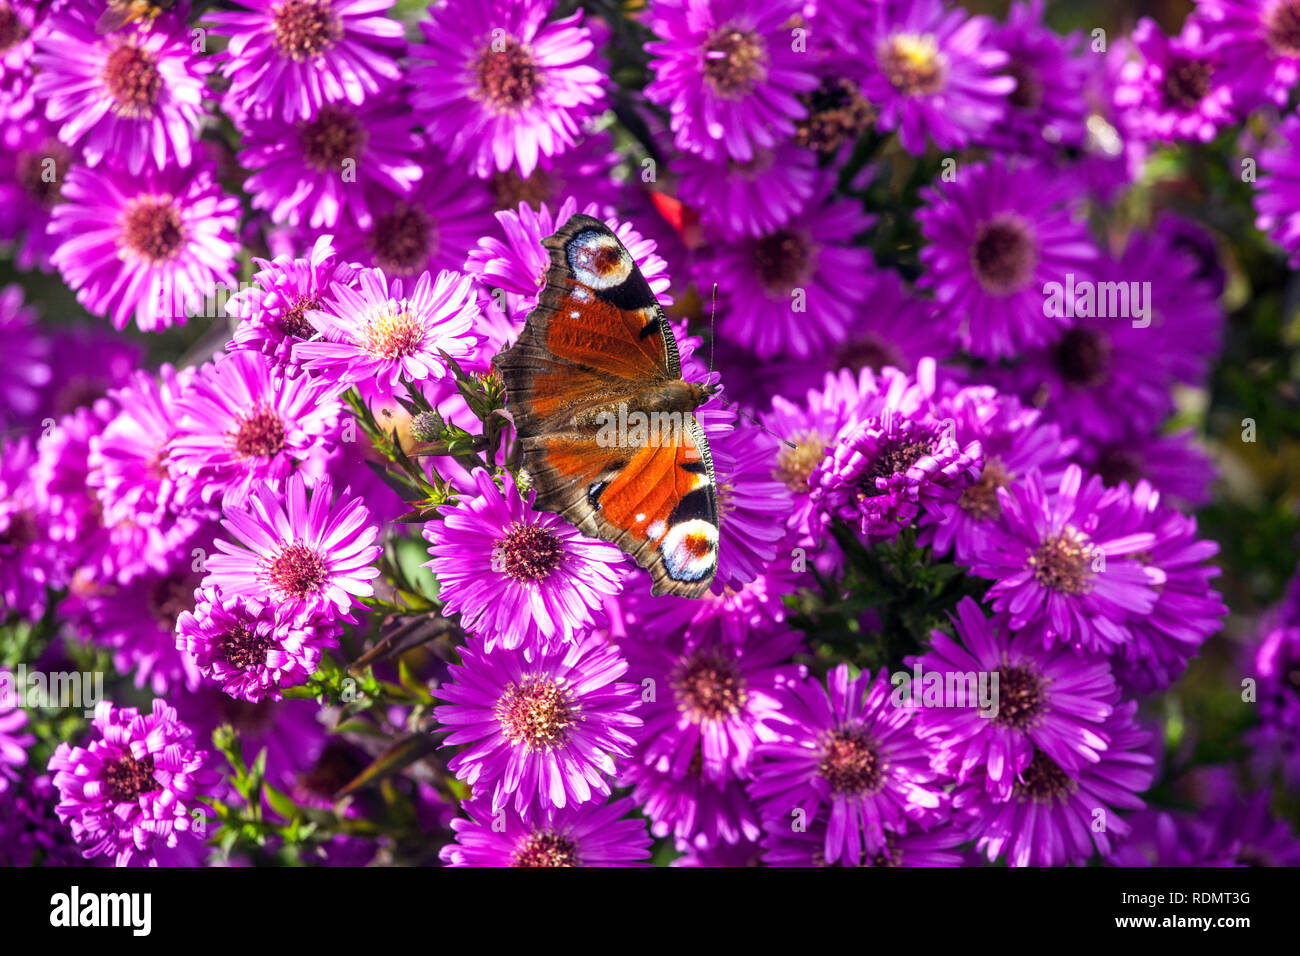 Peacock butterfly Aglais io sitting on a flower, Butterfly peacock on autumn purple aster herbstaster Stock Photo